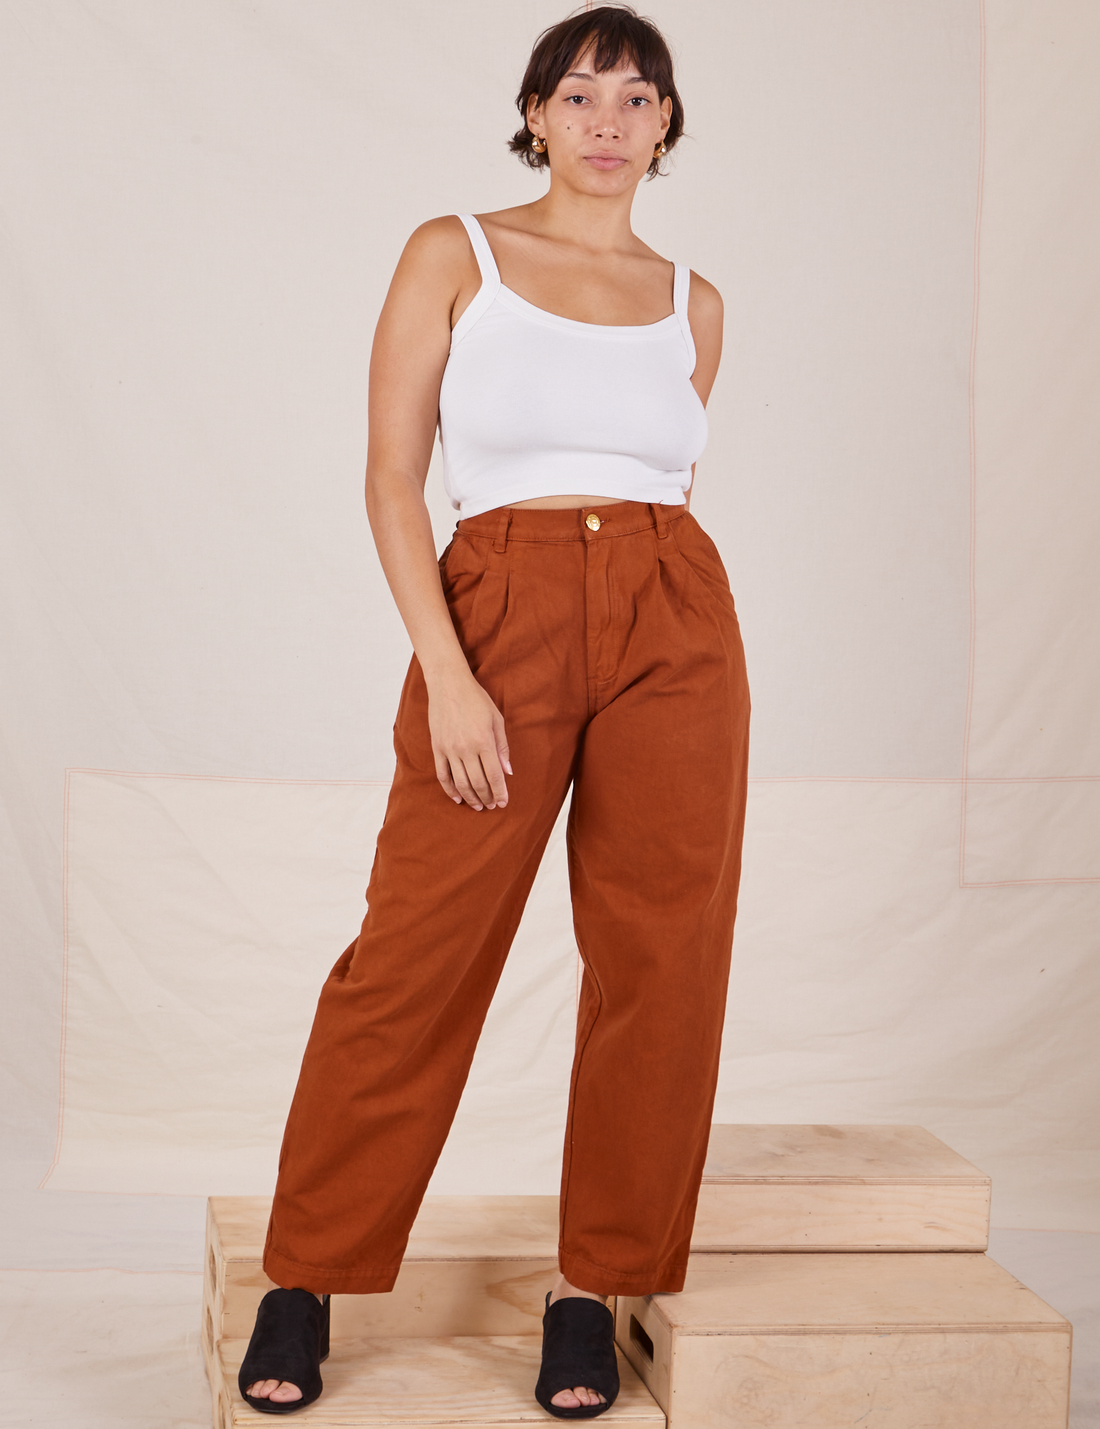 Tiara is 5'4" and wearing S Heavyweight Trousers in Burnt Terracotta paired with vintage off-white Cropped Cami